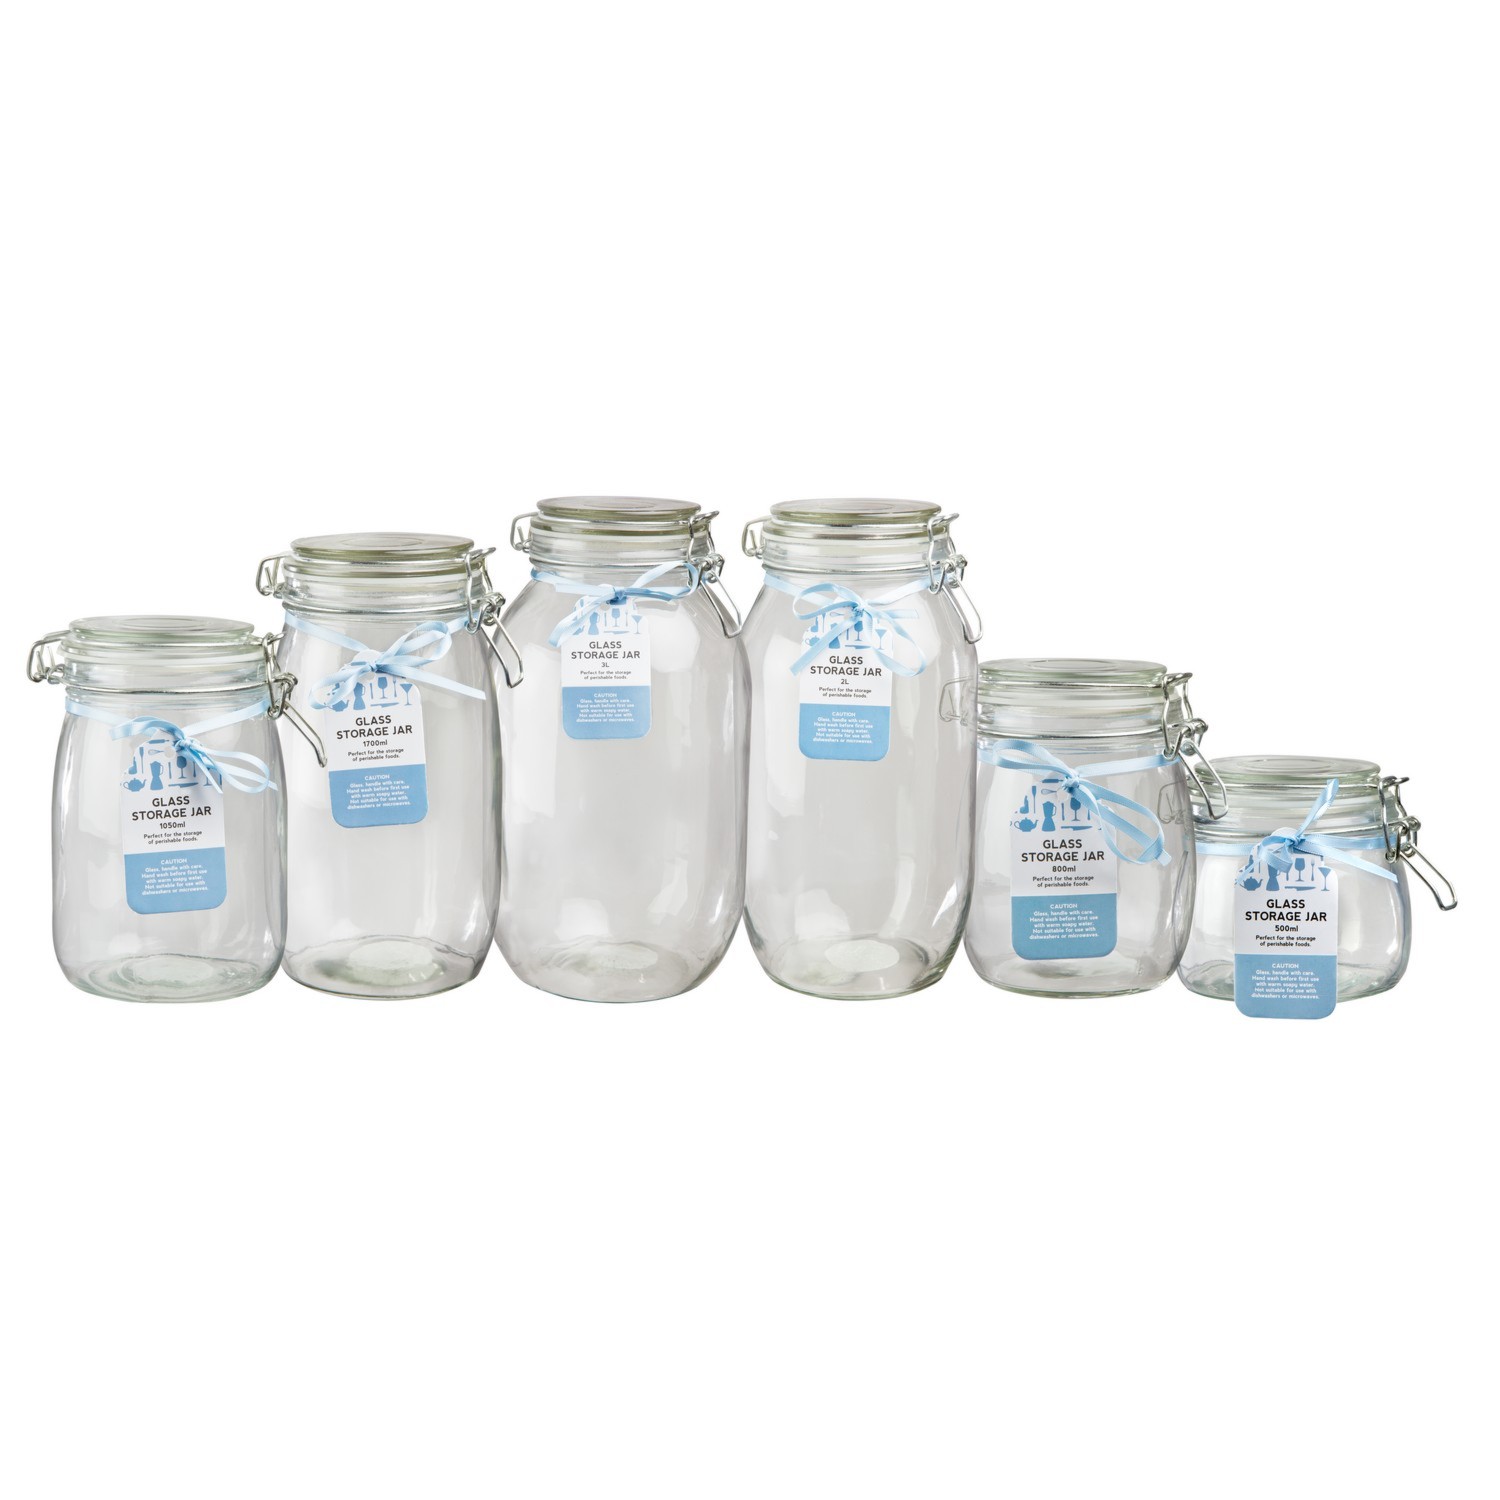 My Home 1.5L Clear Glass Storage Jar with Clip Top Lid Image 2